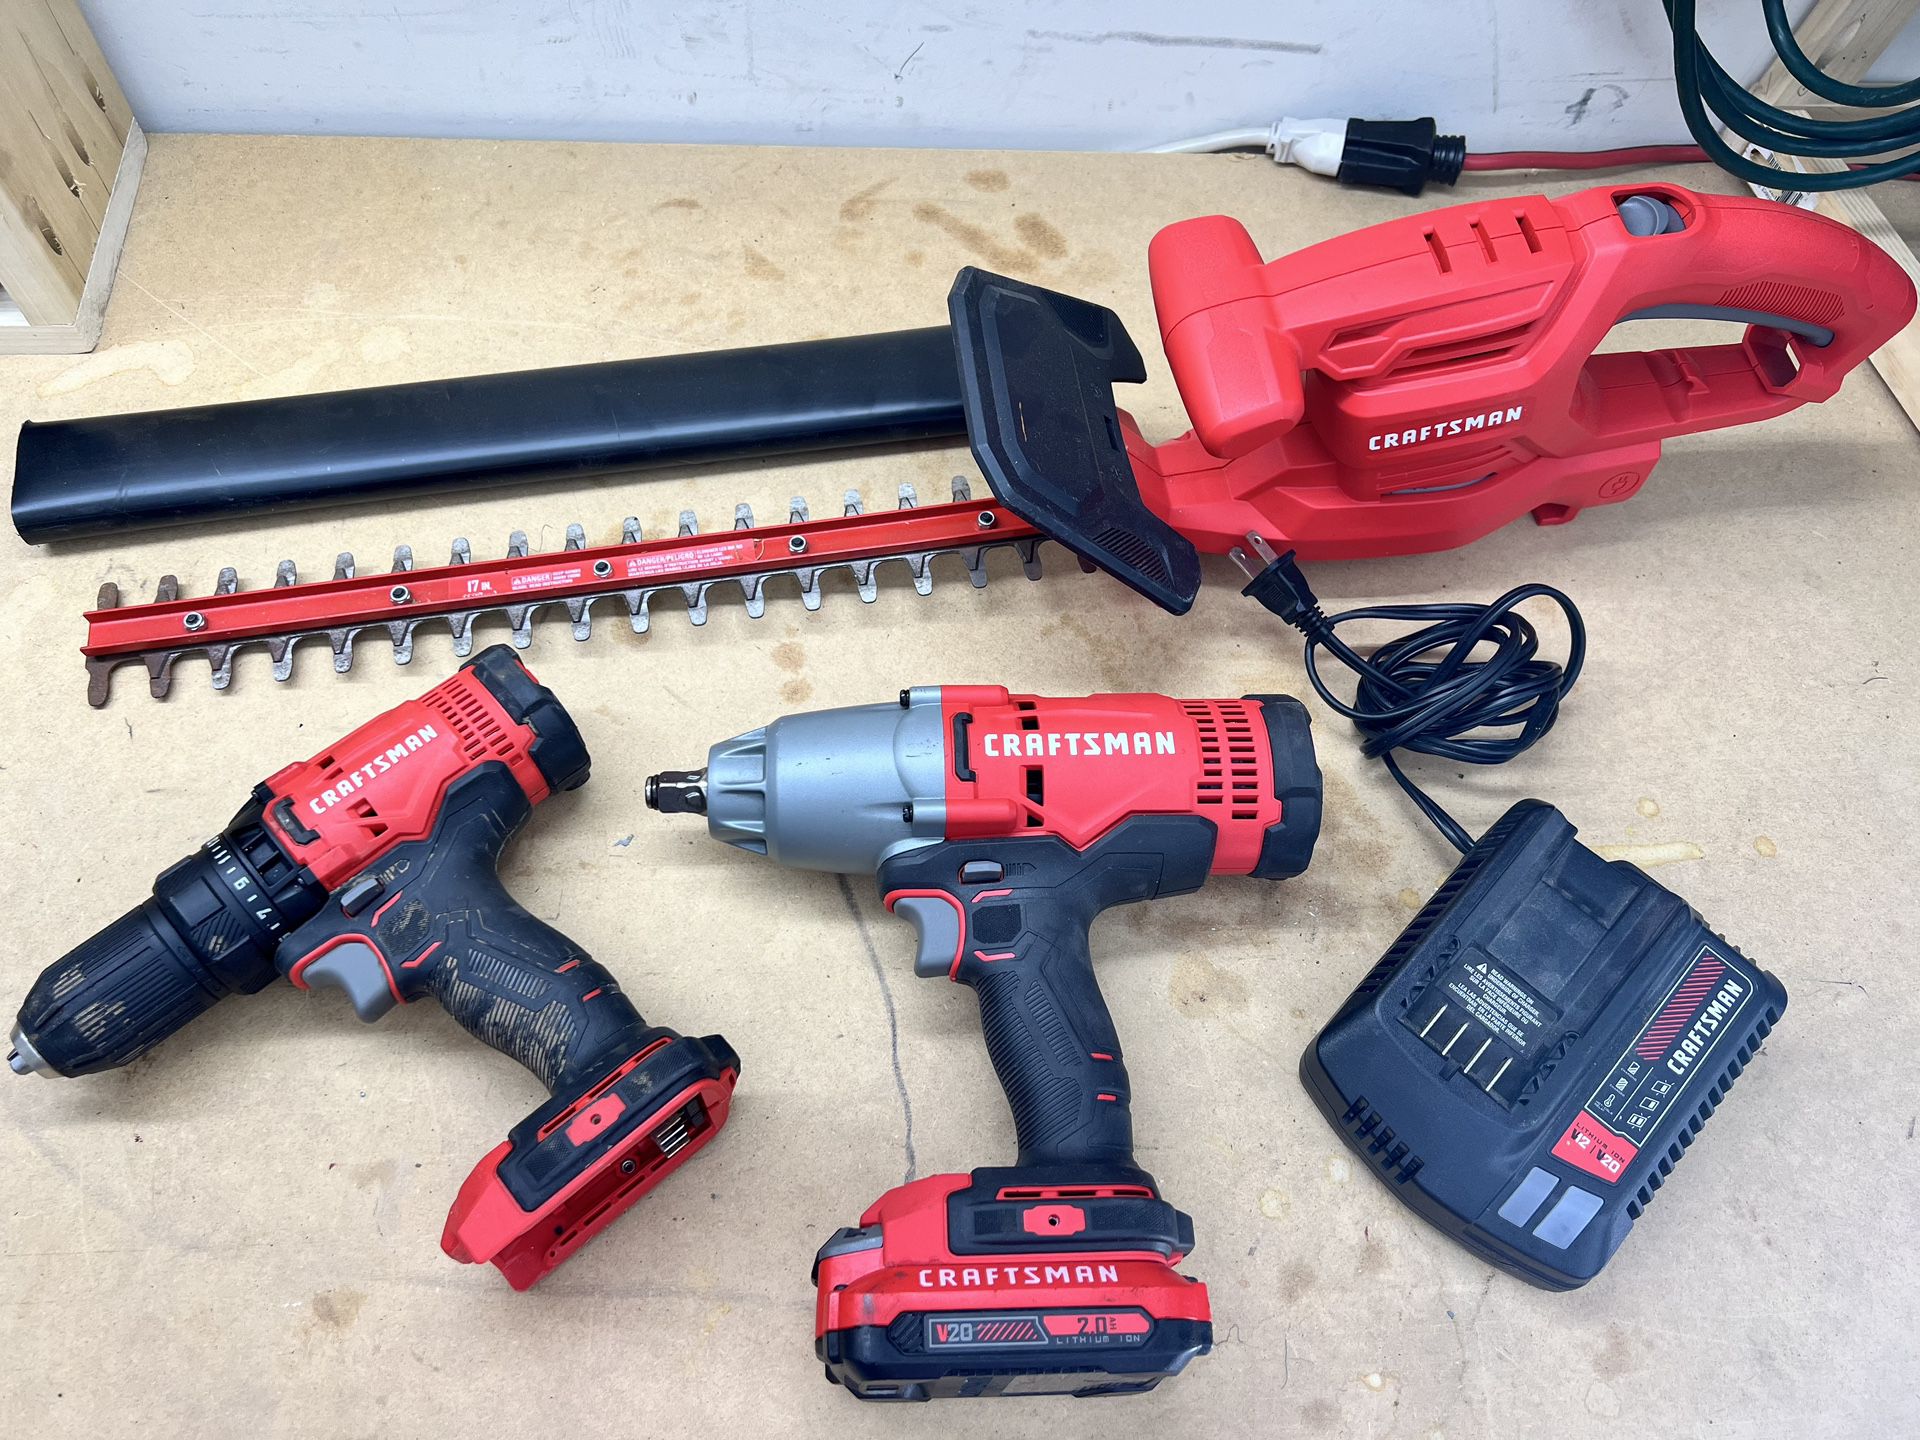 Craftsman Drill, trimmer & 1/2 Impact driver